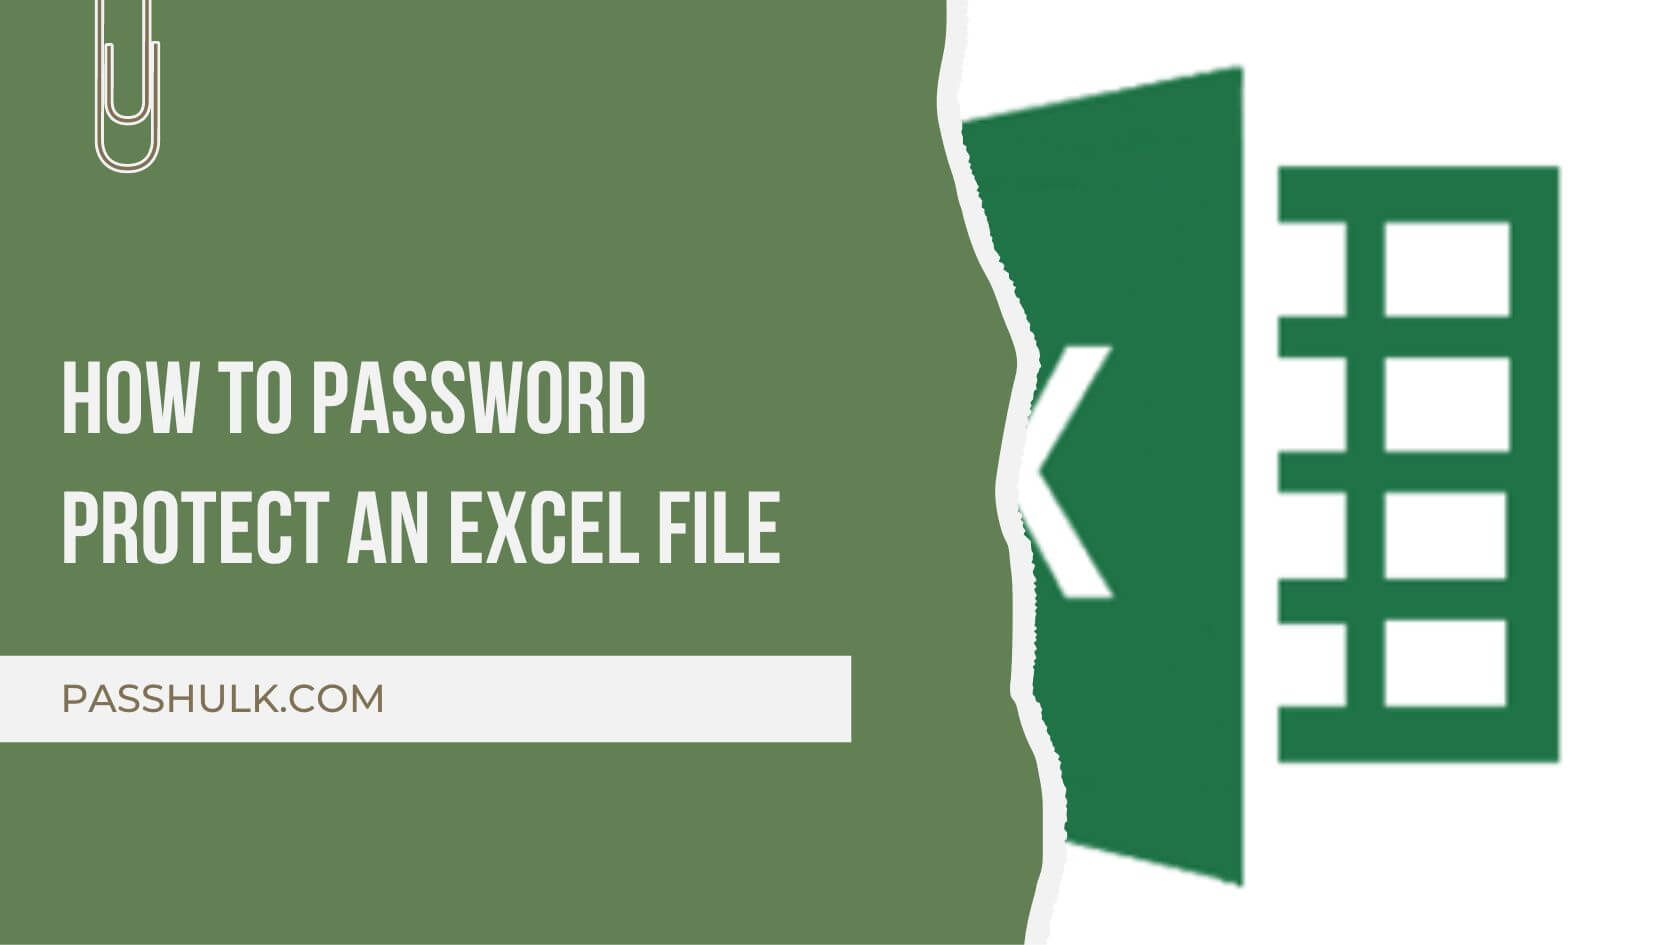 How To Password Protect An Excel File